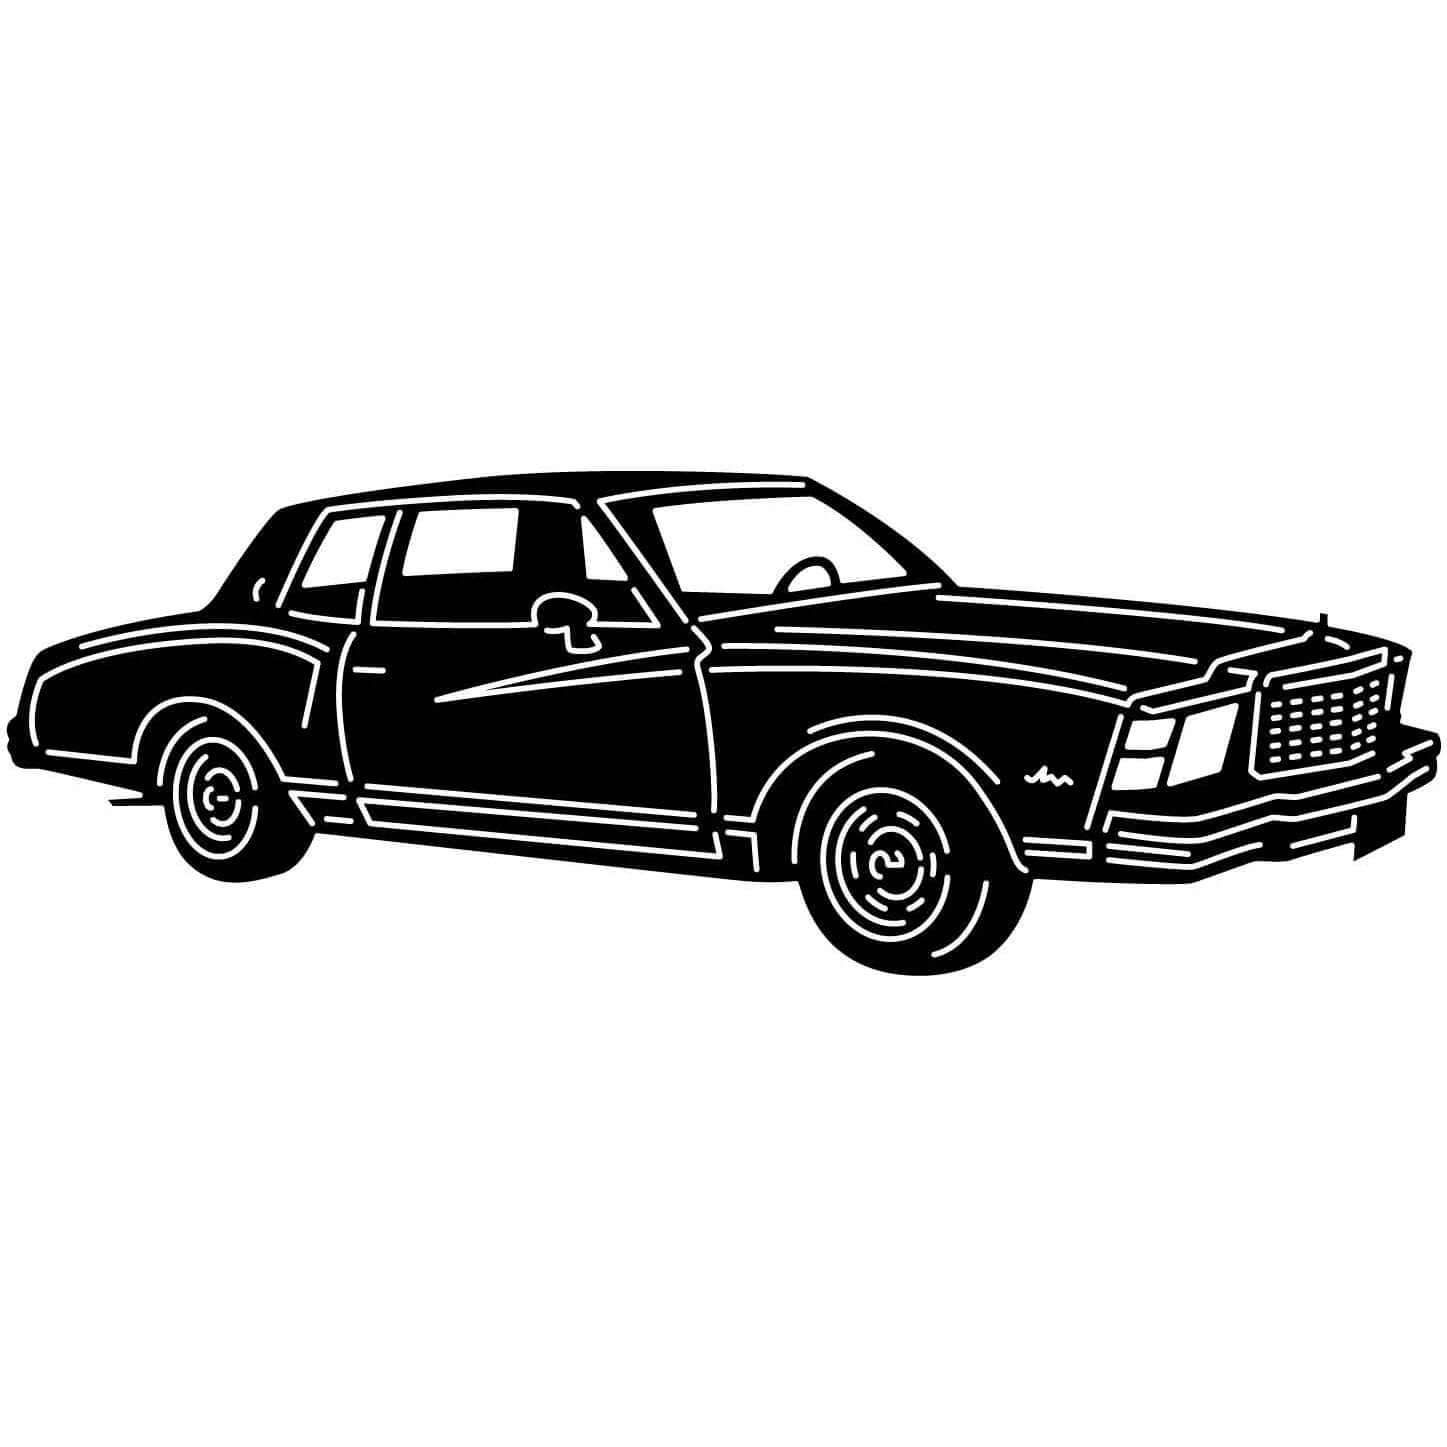 1979 Monte Carlo Old Muscle Car-DXF files cut ready for cnc machines-DXFforCNC.com